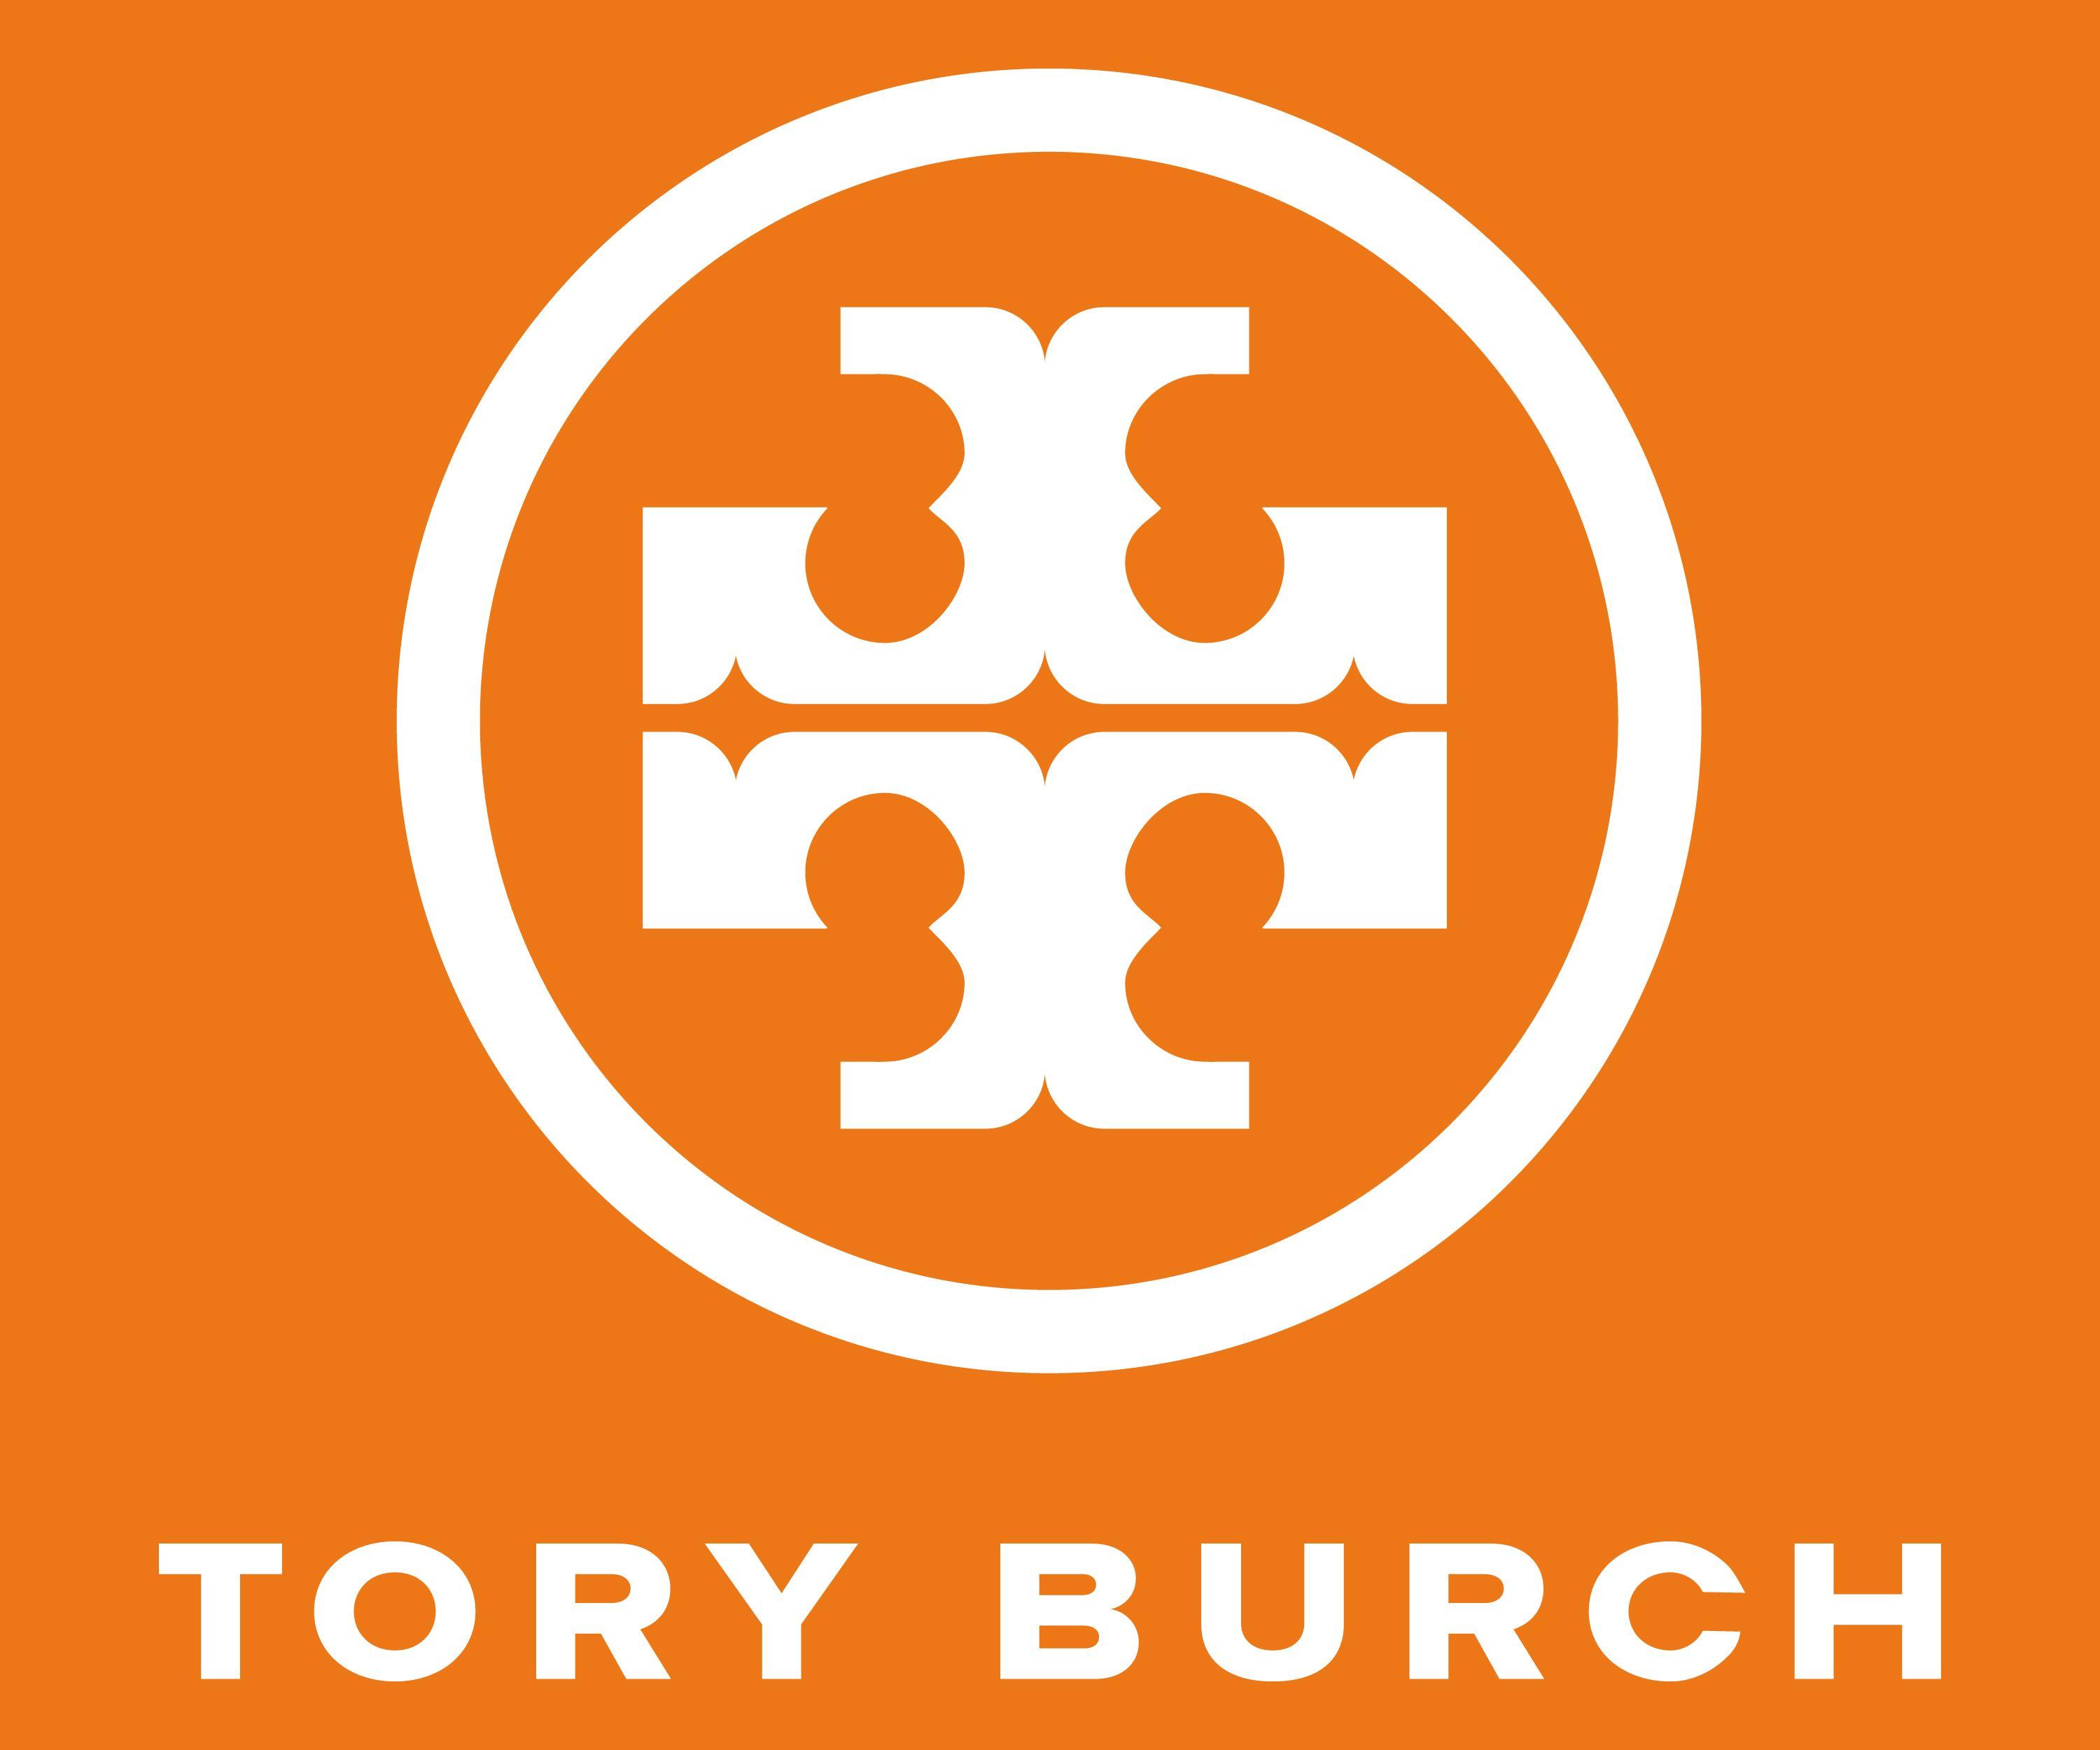 The Tory Burch Logo - Tory Burch Logo, Tory Burch Symbol, Meaning, History and Evolution